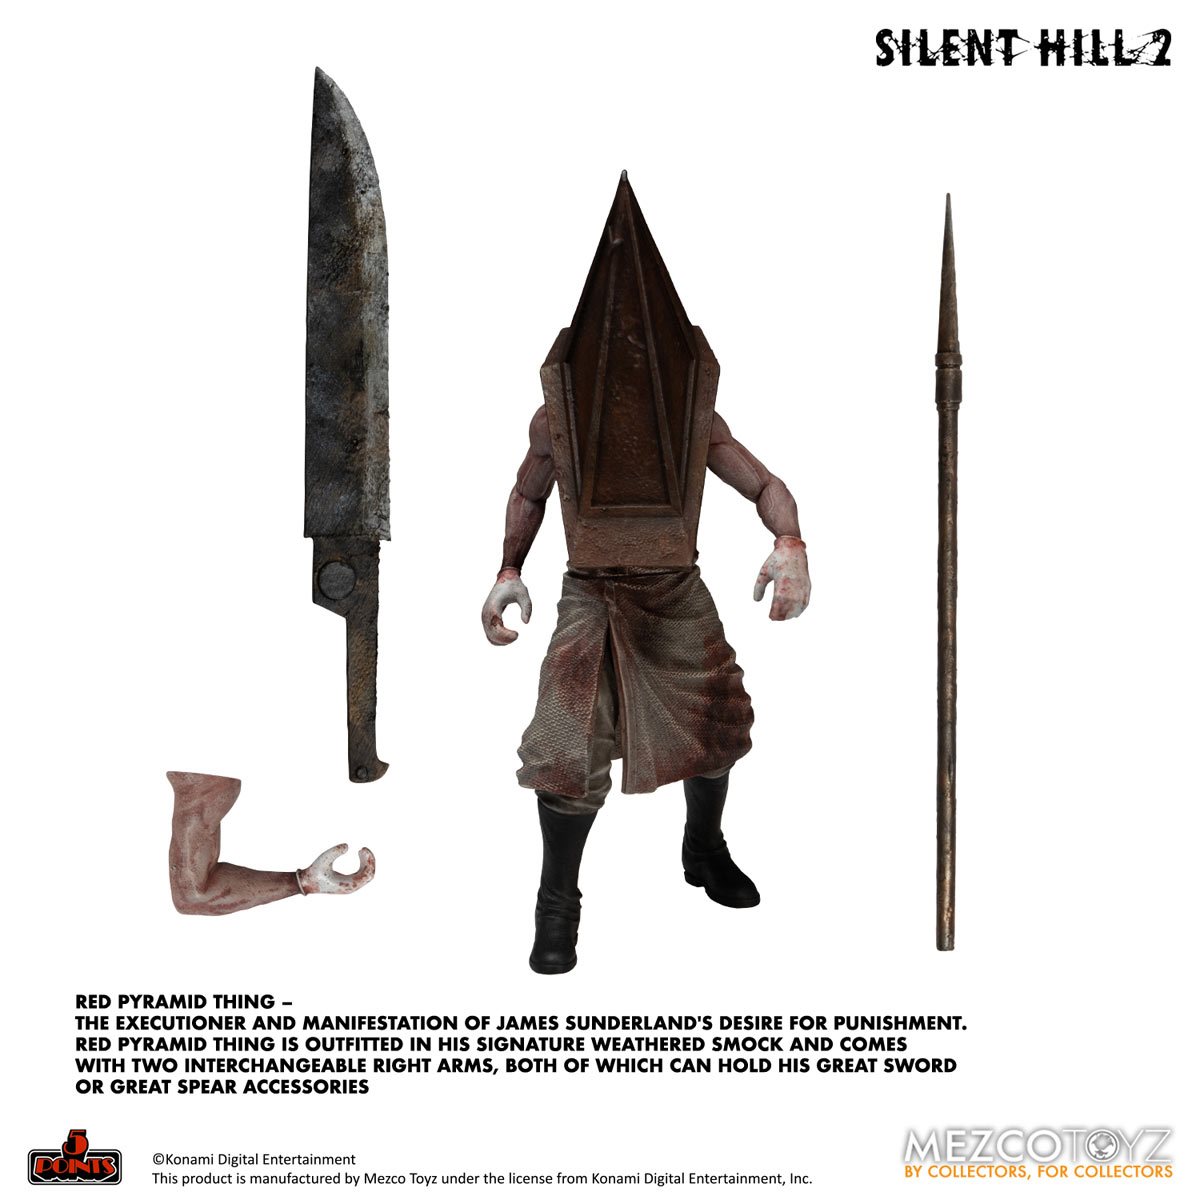 Silent Hill 2 - 5 Points Deluxe Boxed Set - Screamers Costumes